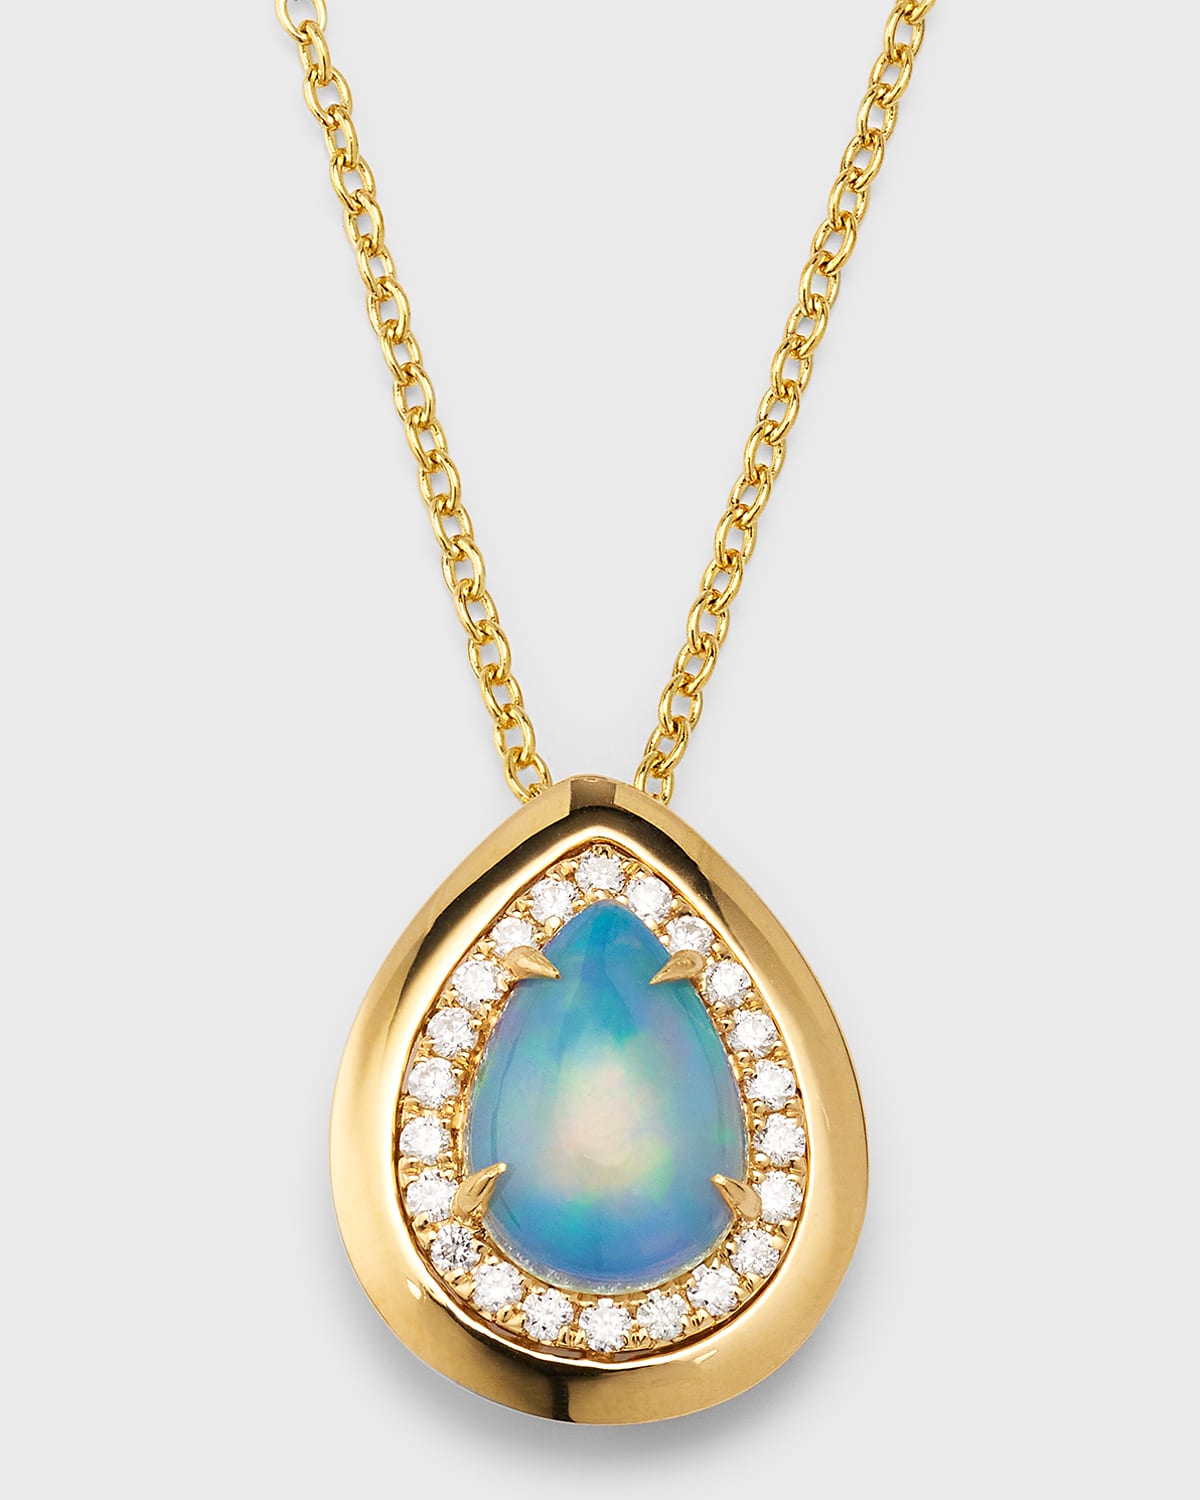 18K Yellow Gold Pendant with Oval Opal and Diamonds, 2.31tcw